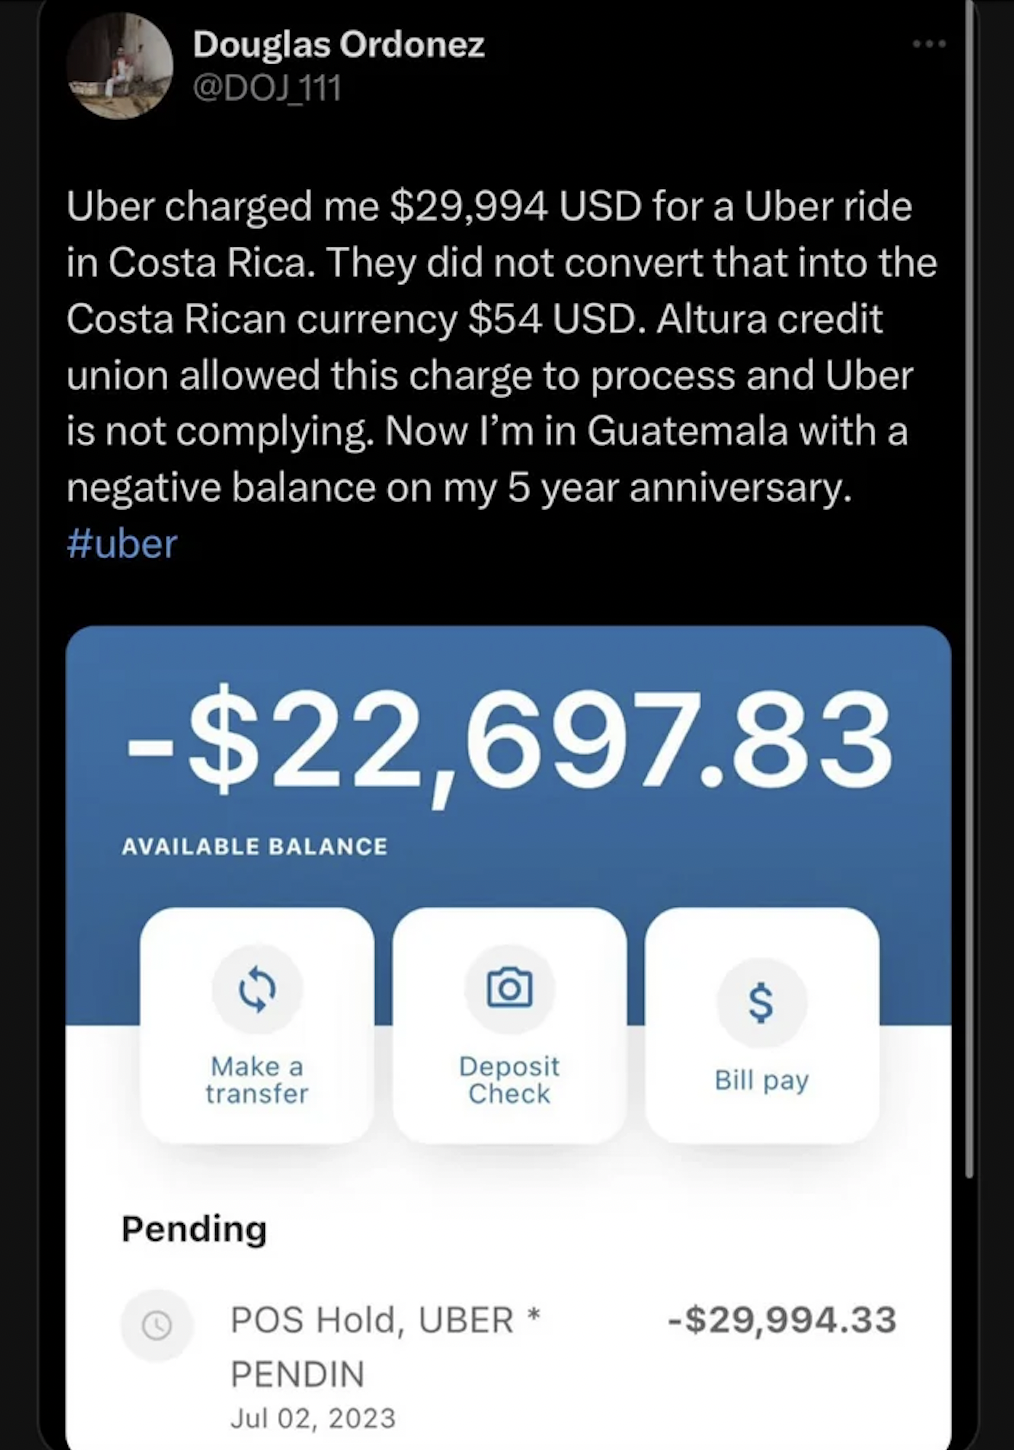 screenshot - Douglas Ordonez Uber charged me $29,994 Usd for a Uber ride in Costa Rica. They did not convert that into the Costa Rican currency $54 Usd. Altura credit union allowed this charge to process and Uber is not complying. Now I'm in Guatemala wit